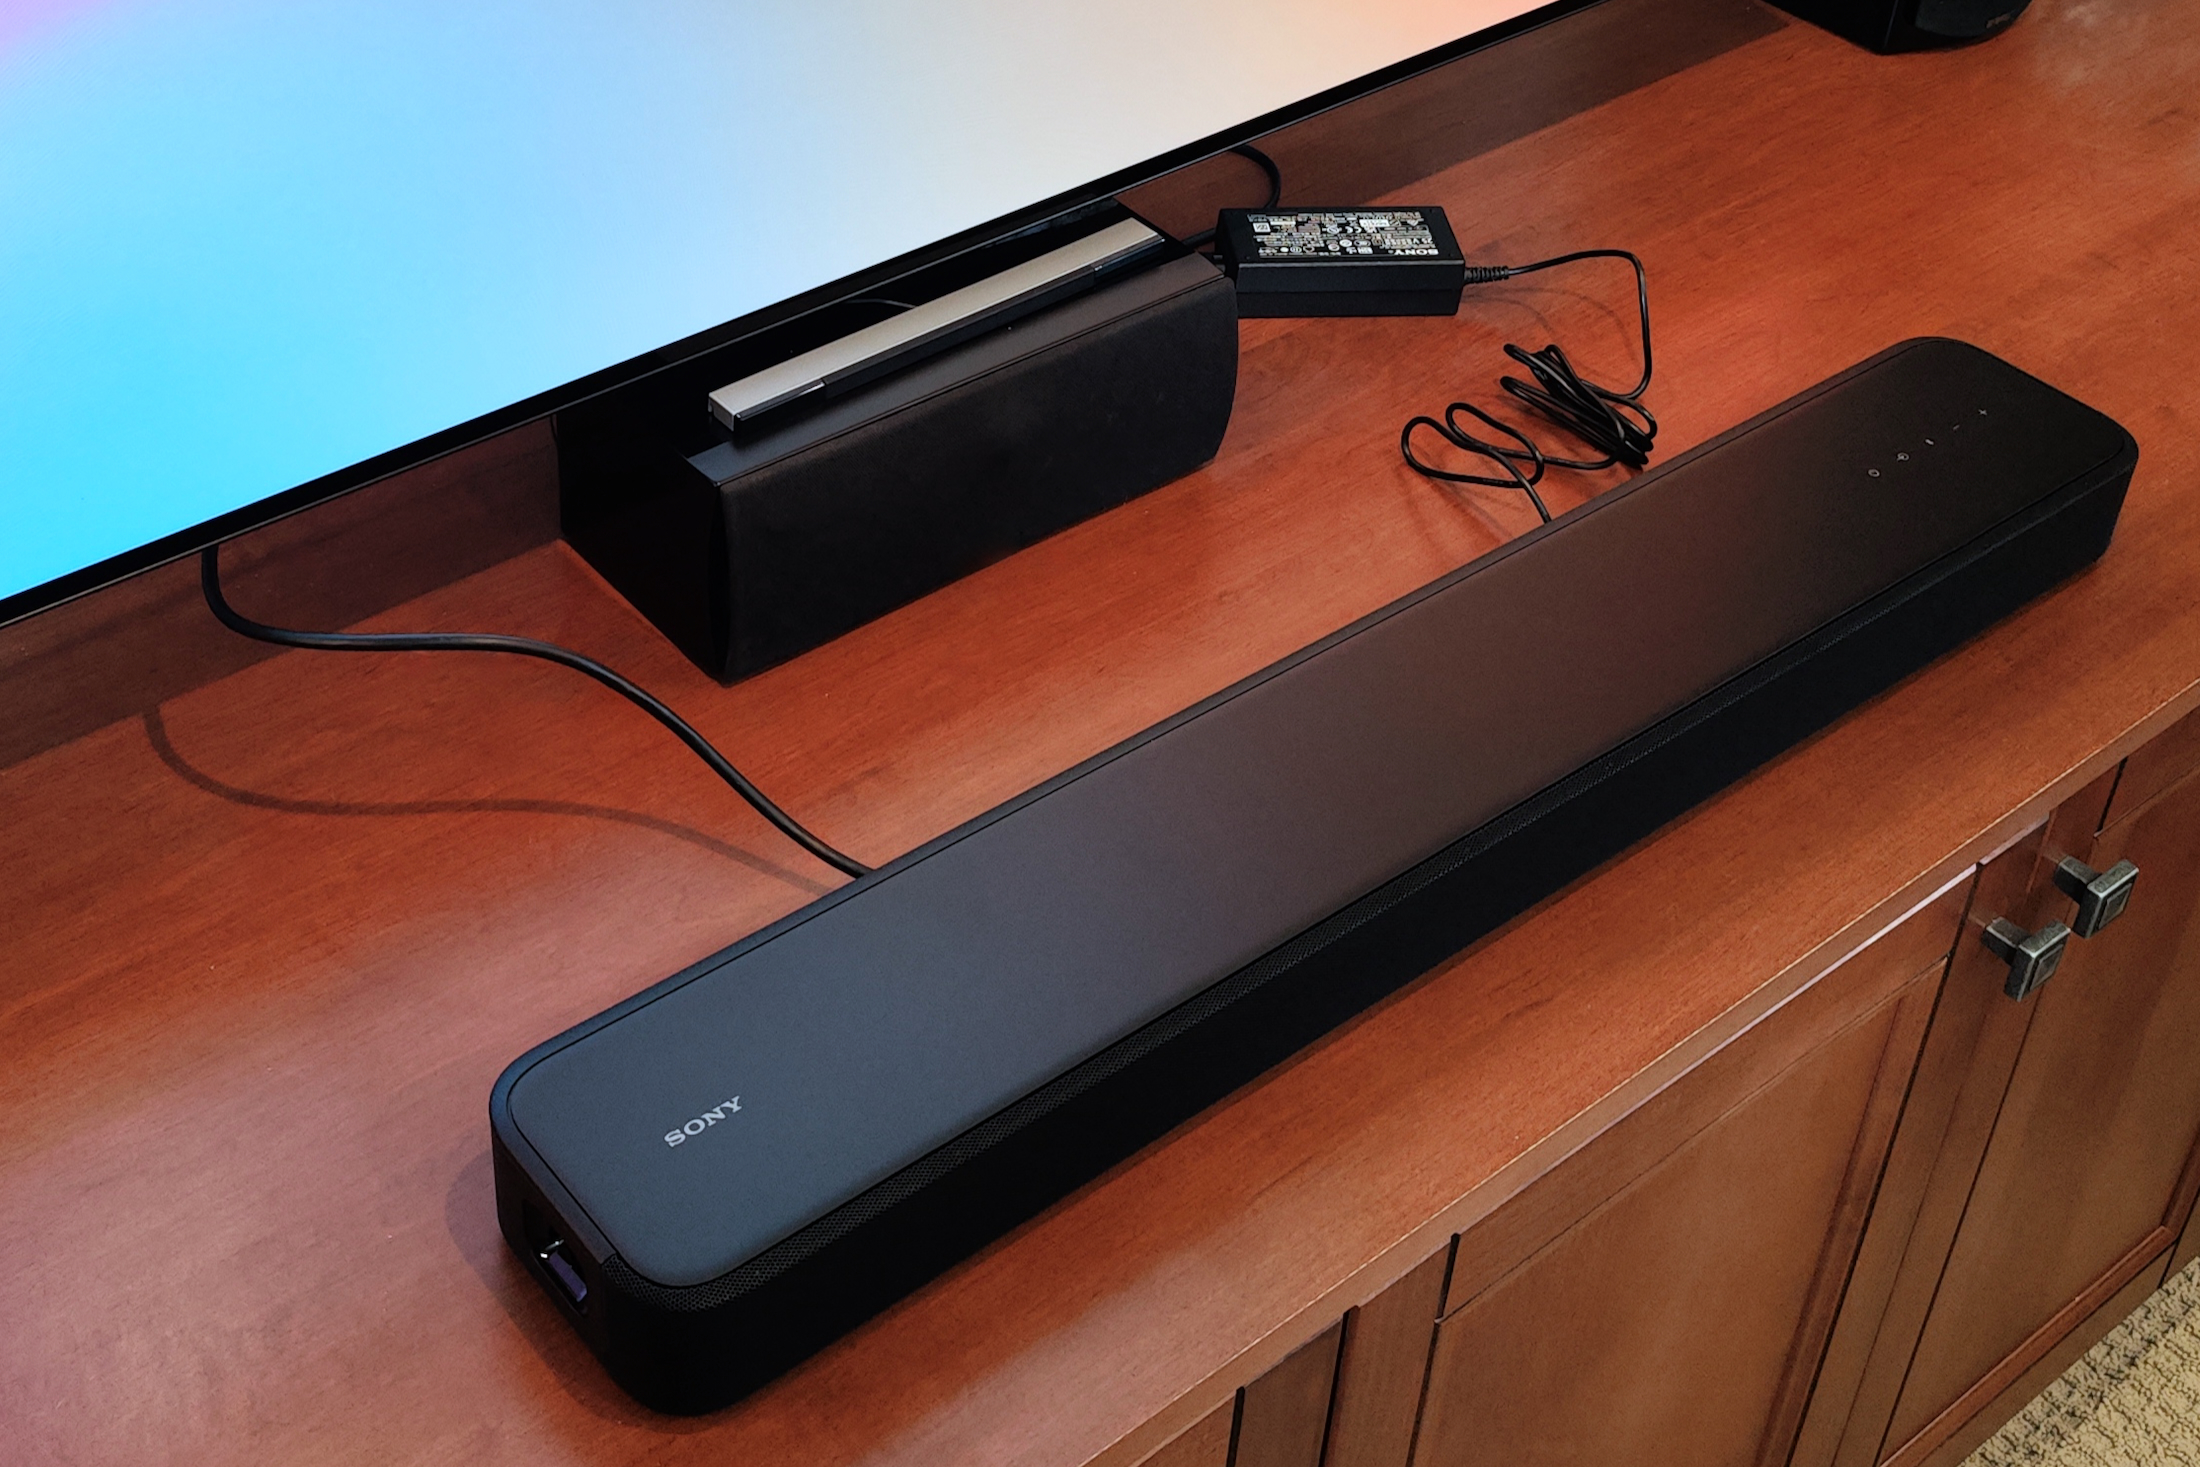 Sony HT-S2000 for sound review: Digital bigger Trends | trades smarts Sony